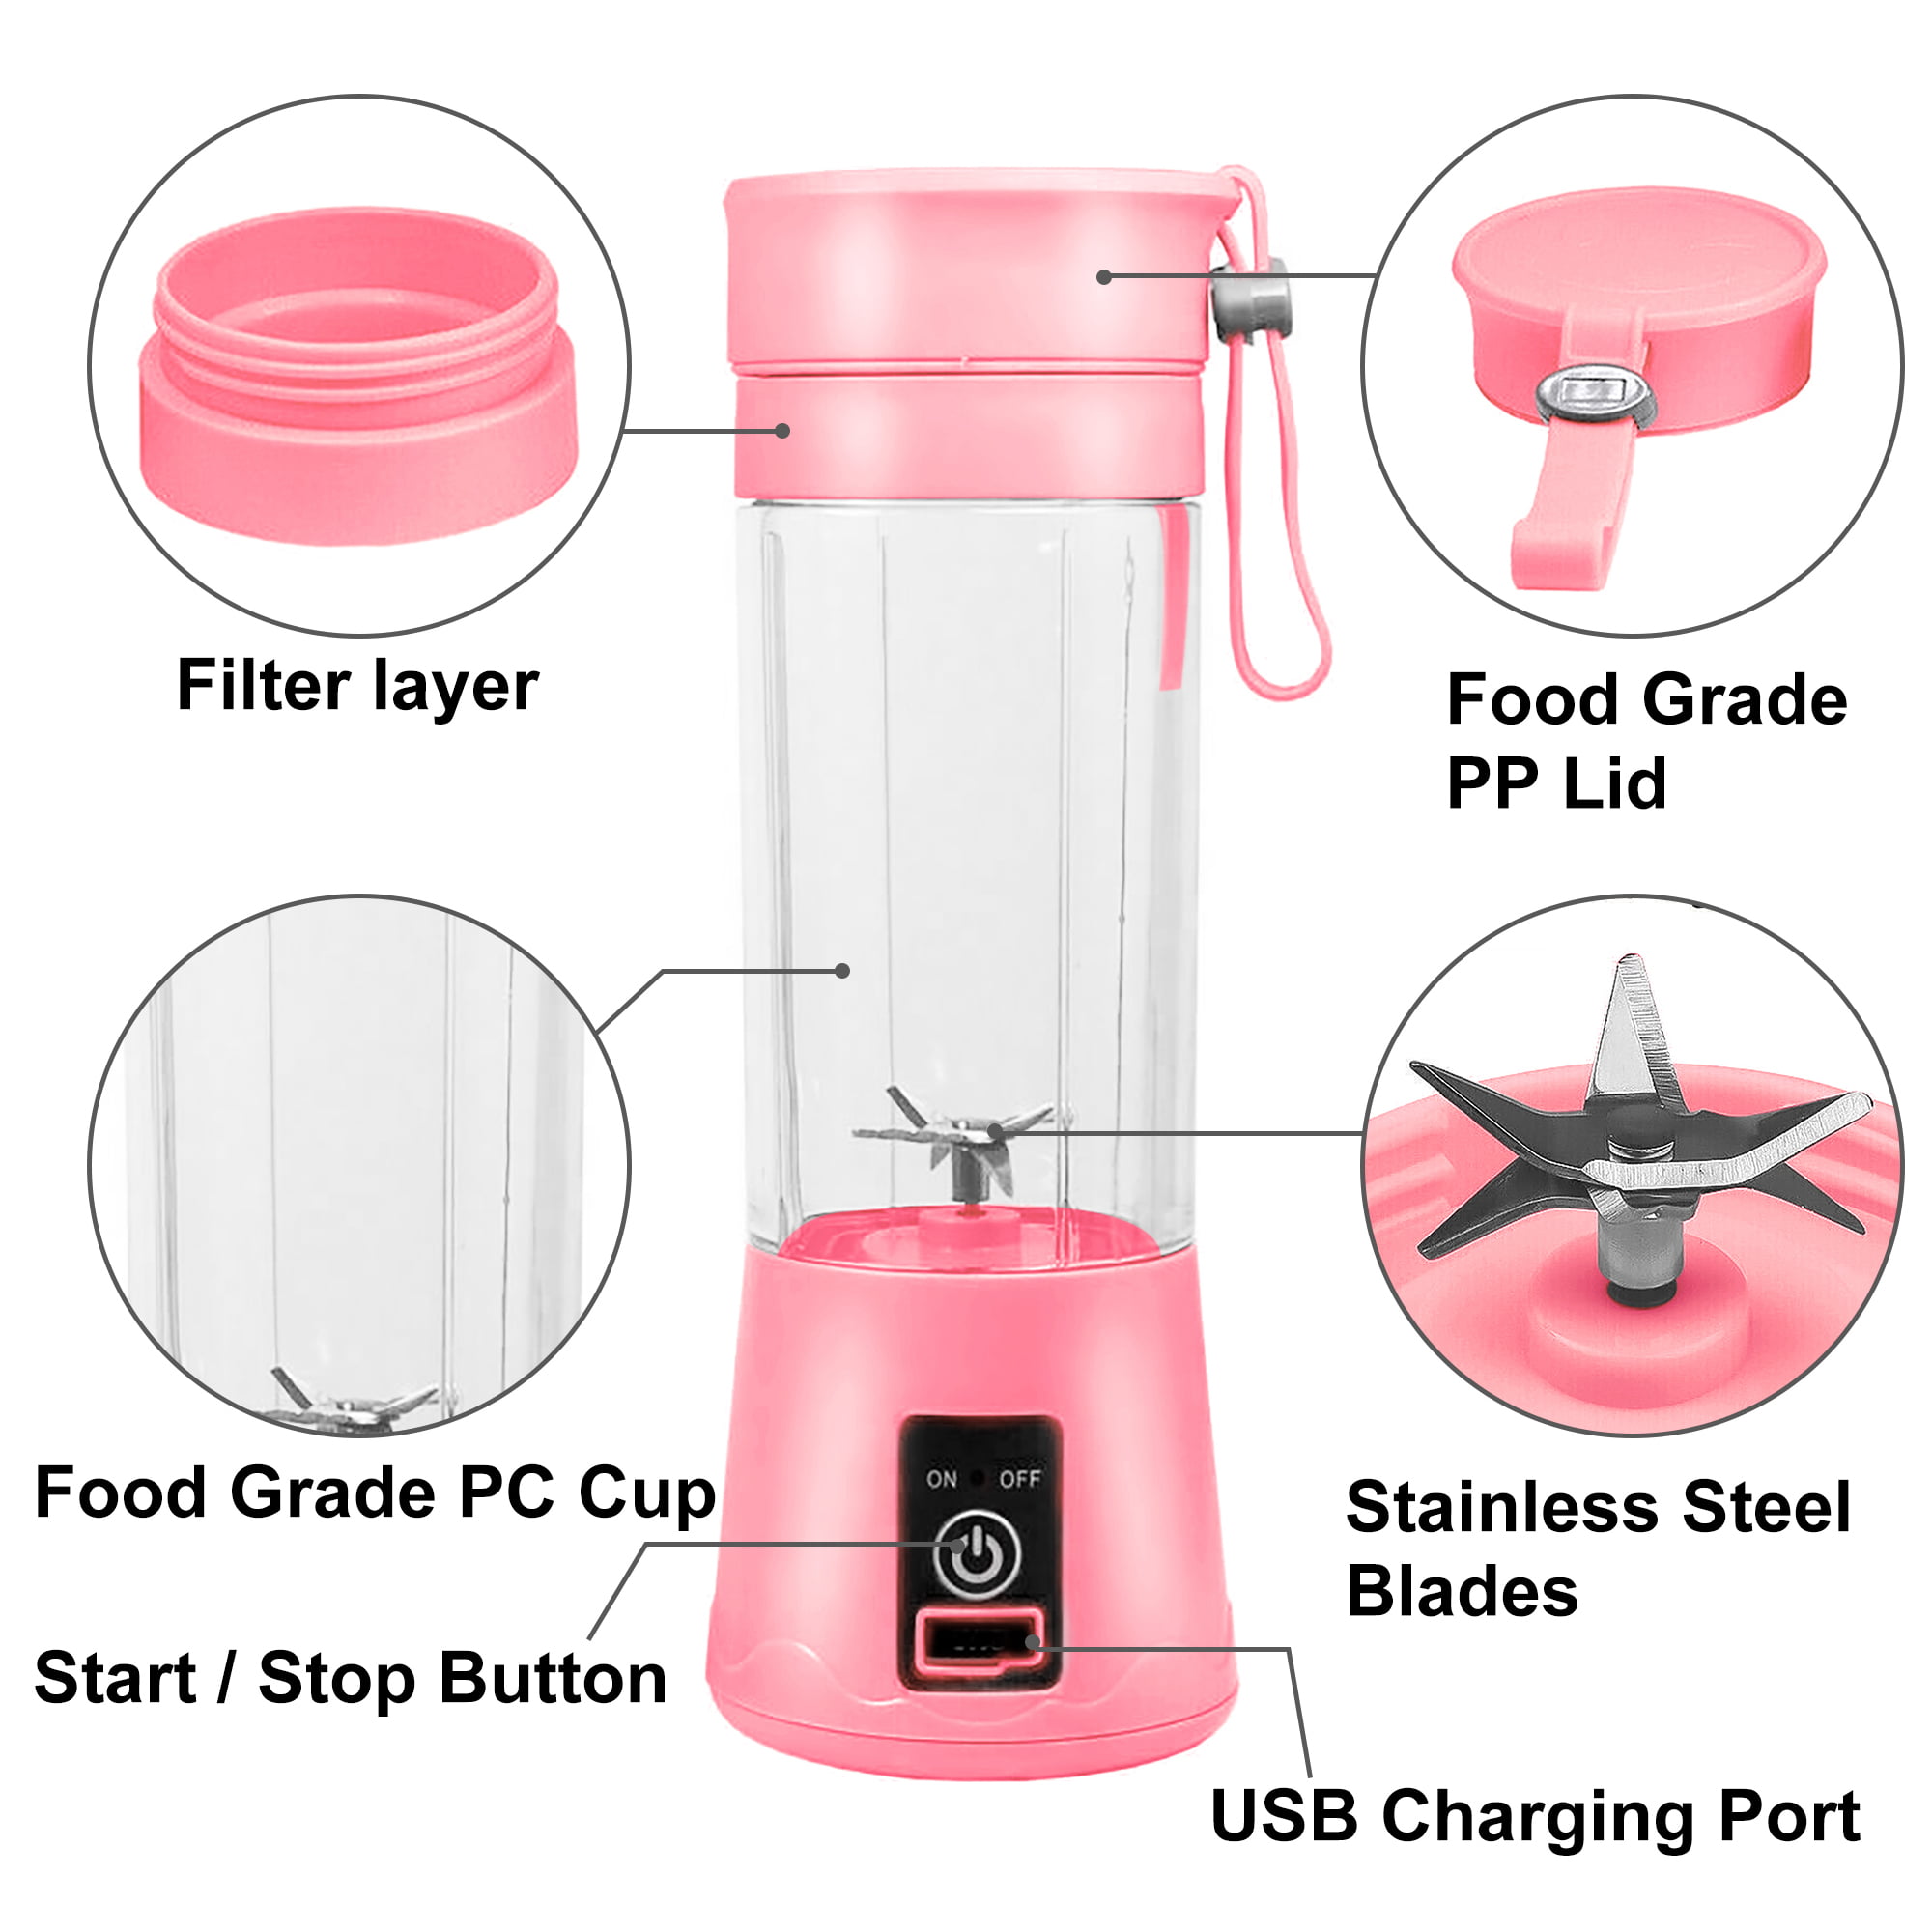 Tenswall Portable, Personal Size Blender Shakes and Smoothies Mini Juc –  Nectar Juice And Smoothie Bar